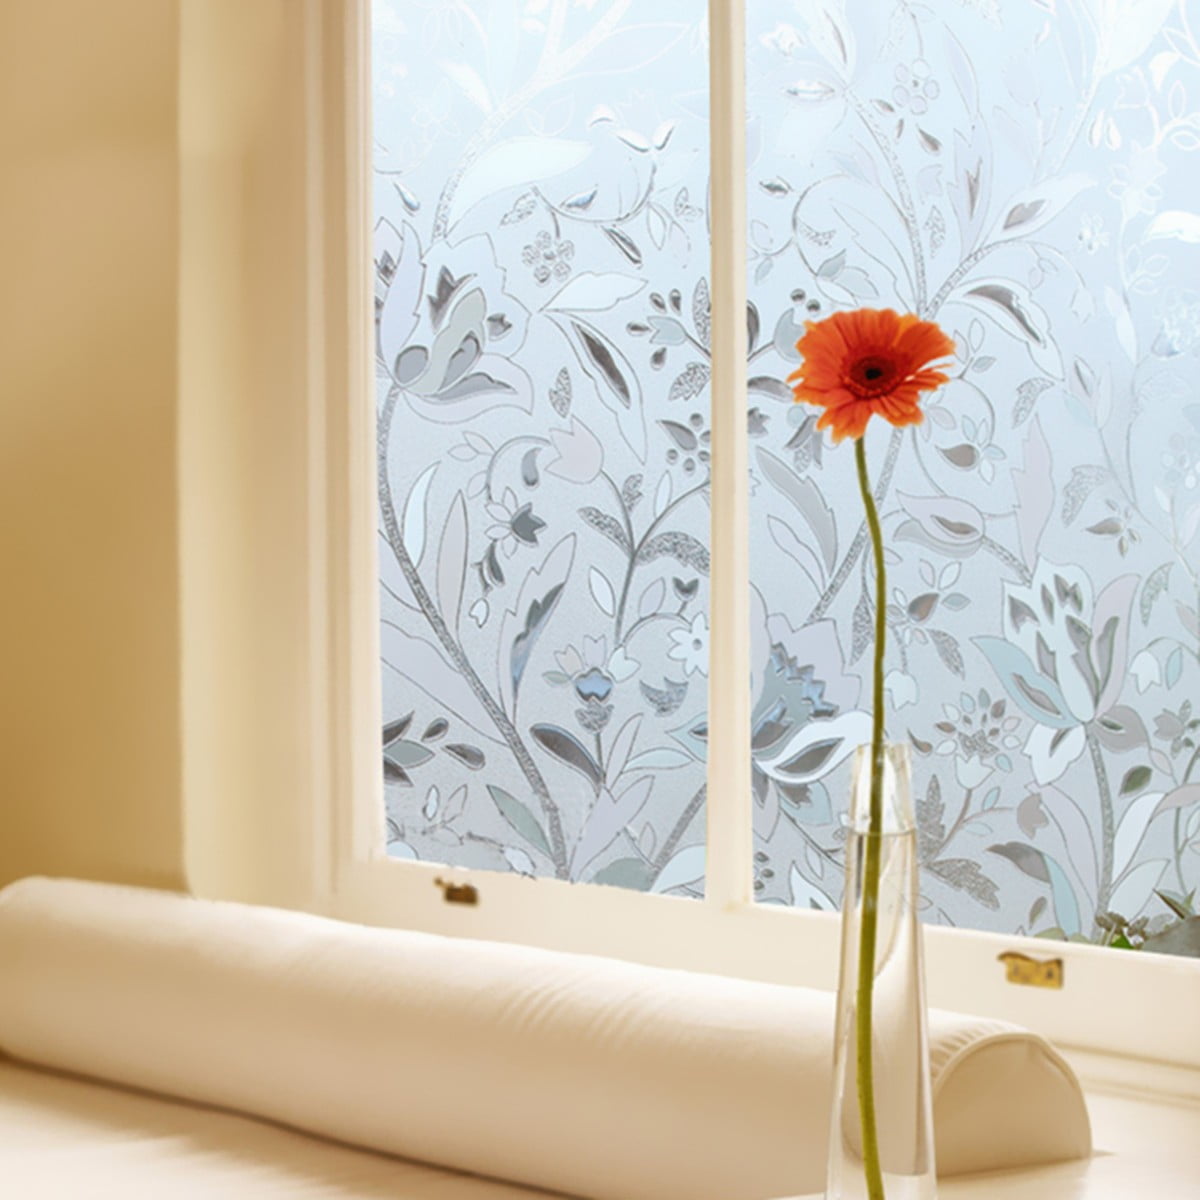 WHITE FLORAL FROSTED DECORATIVE WINDOW FILM 90cm x 1m Roll 9607 